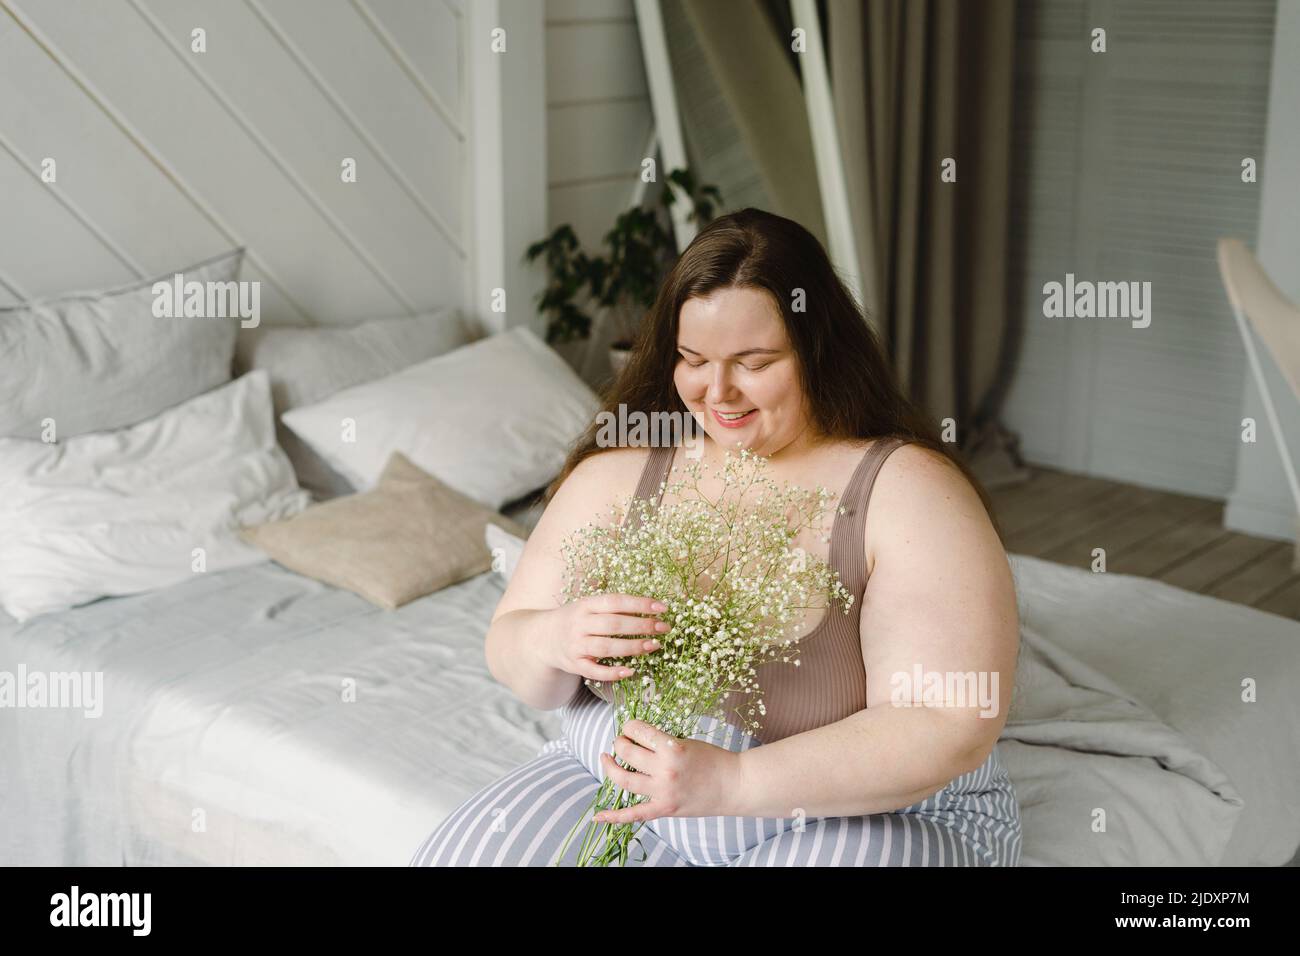 brunette woman with natural makeup and plus size body wearing